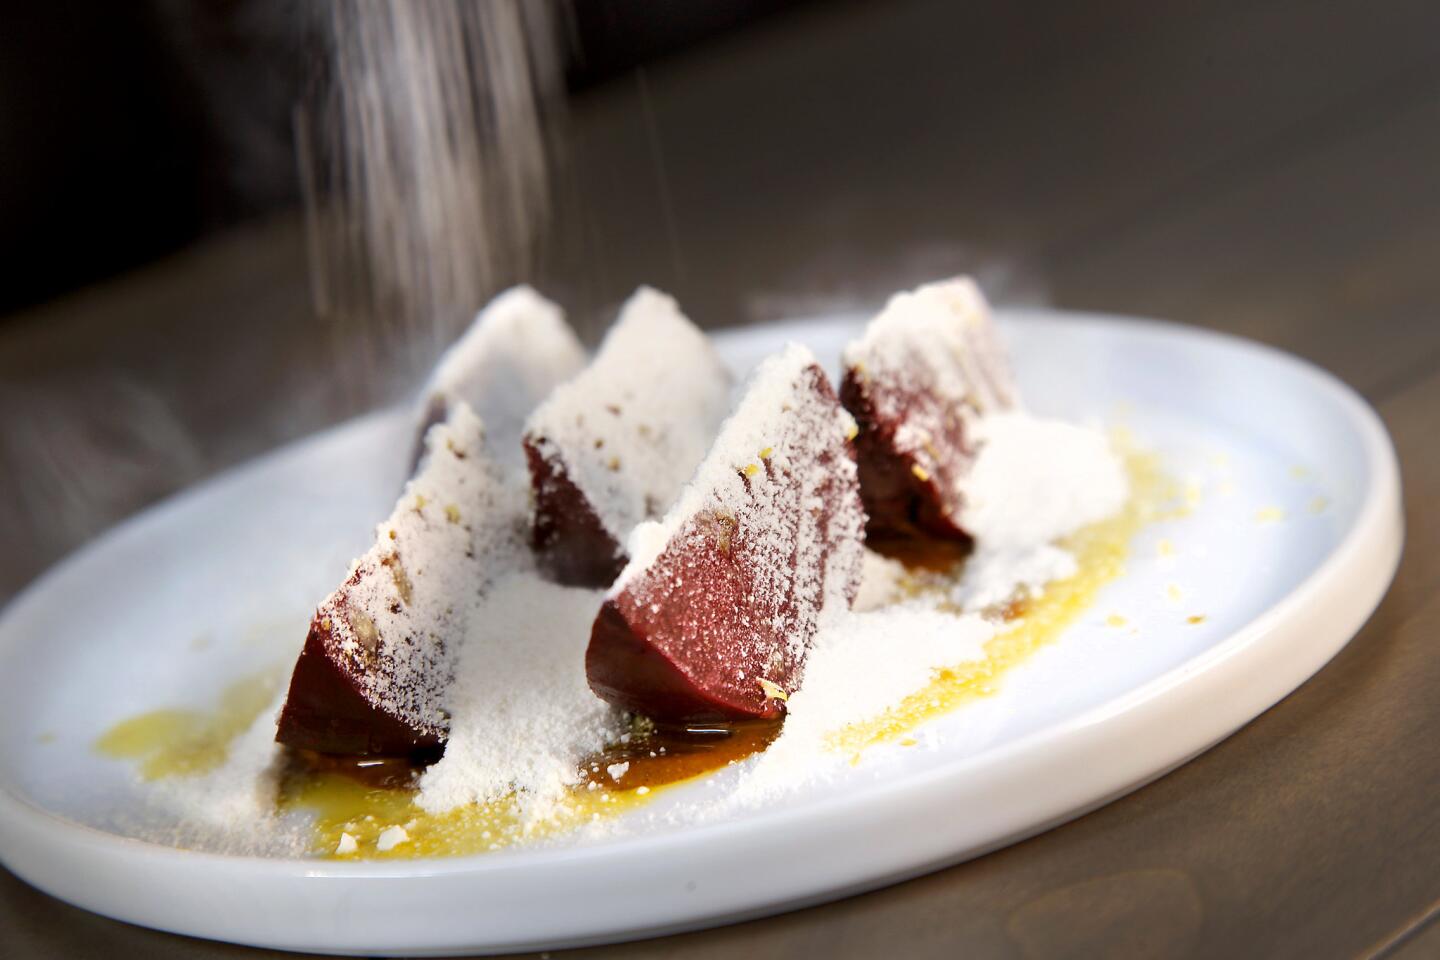 Michael Voltaggio's latest restaurant project is Ink.well, a reboot of his last restaurant, Ink, in a new space with a pretty new menu. Pictured here are the Beets by Michael dish, with pistachio butter and horseradish goat cheese.